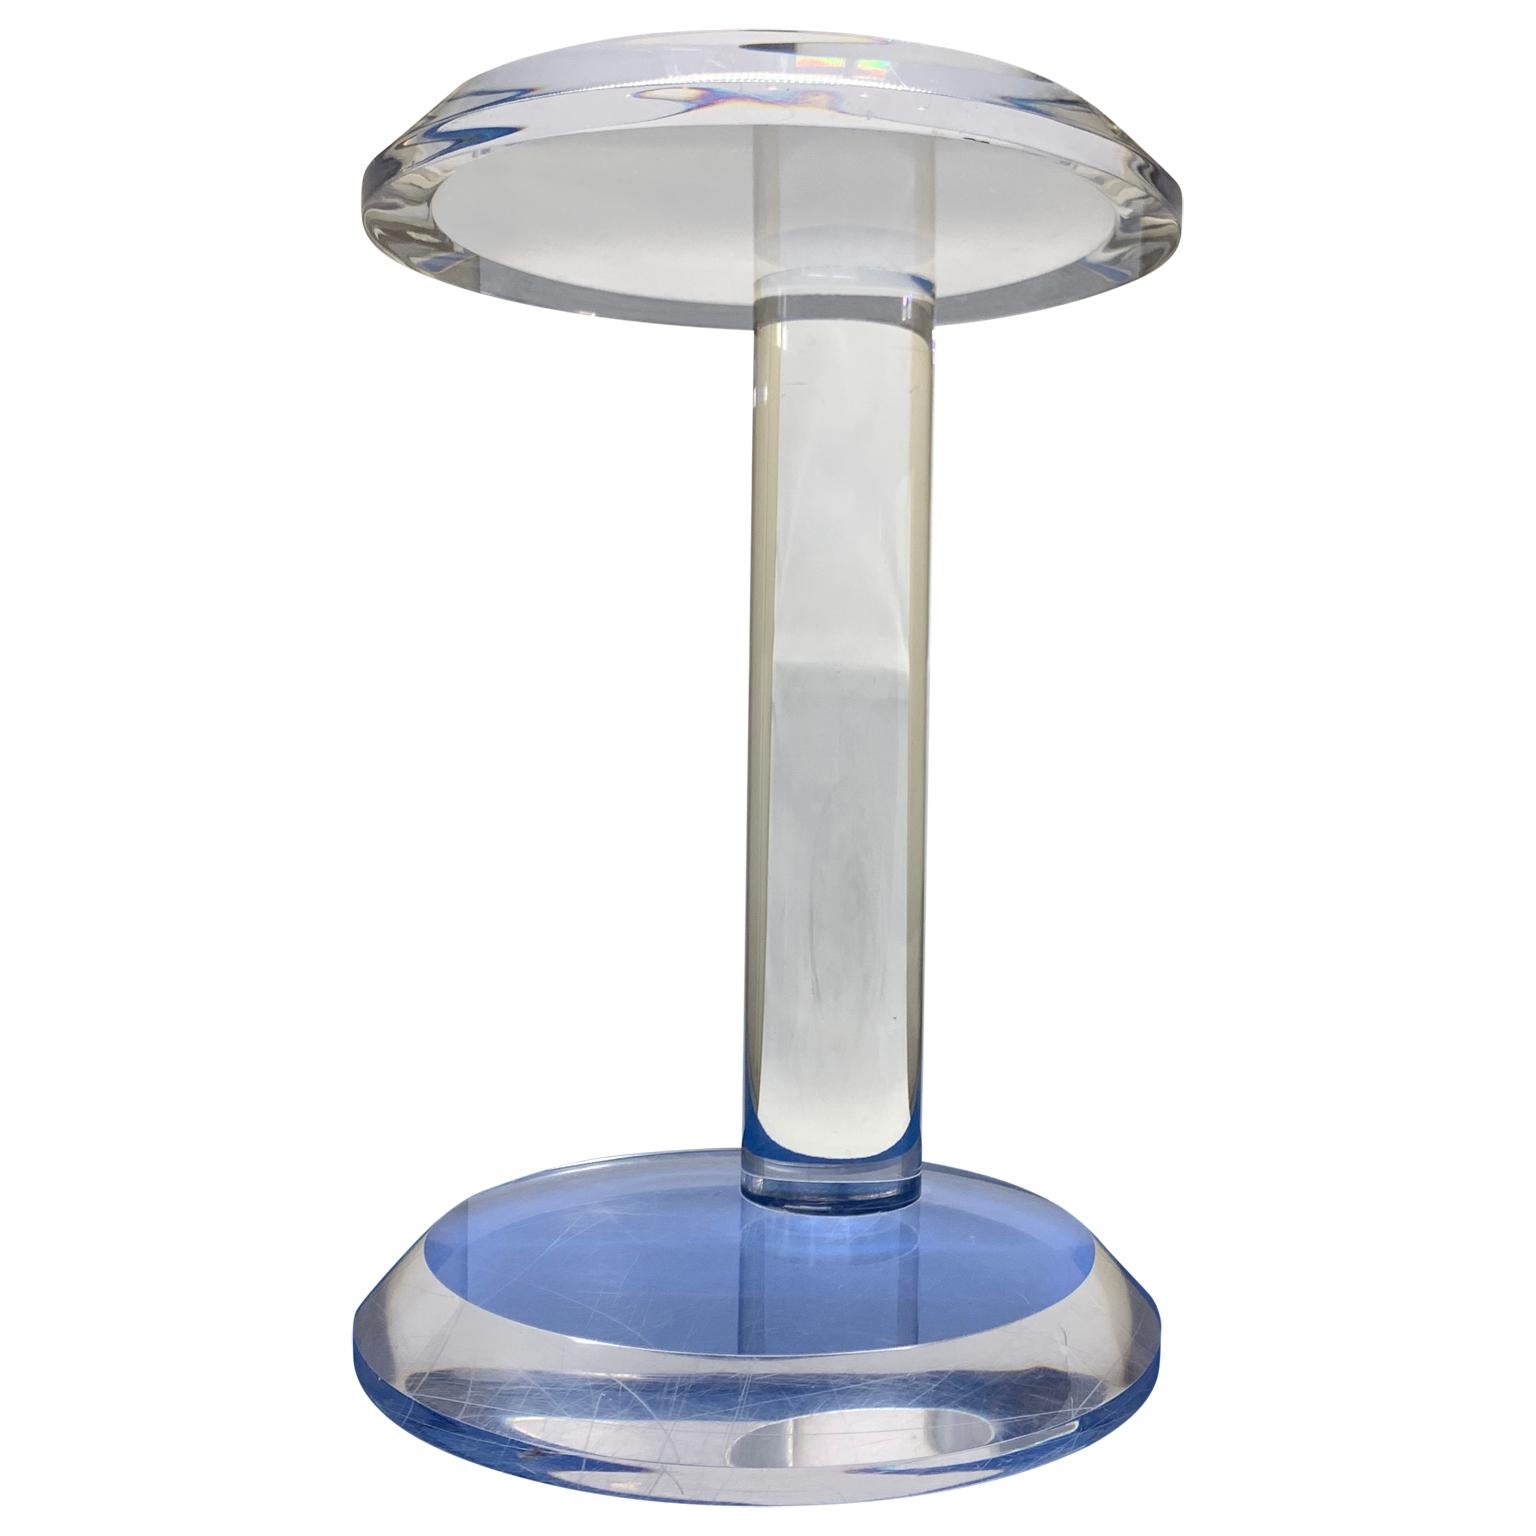 Small Mid-Century Modern thick Lucite round side table.

Lucite base and table top measures 1.5 inches in thickness. The steam measures 3 inches.